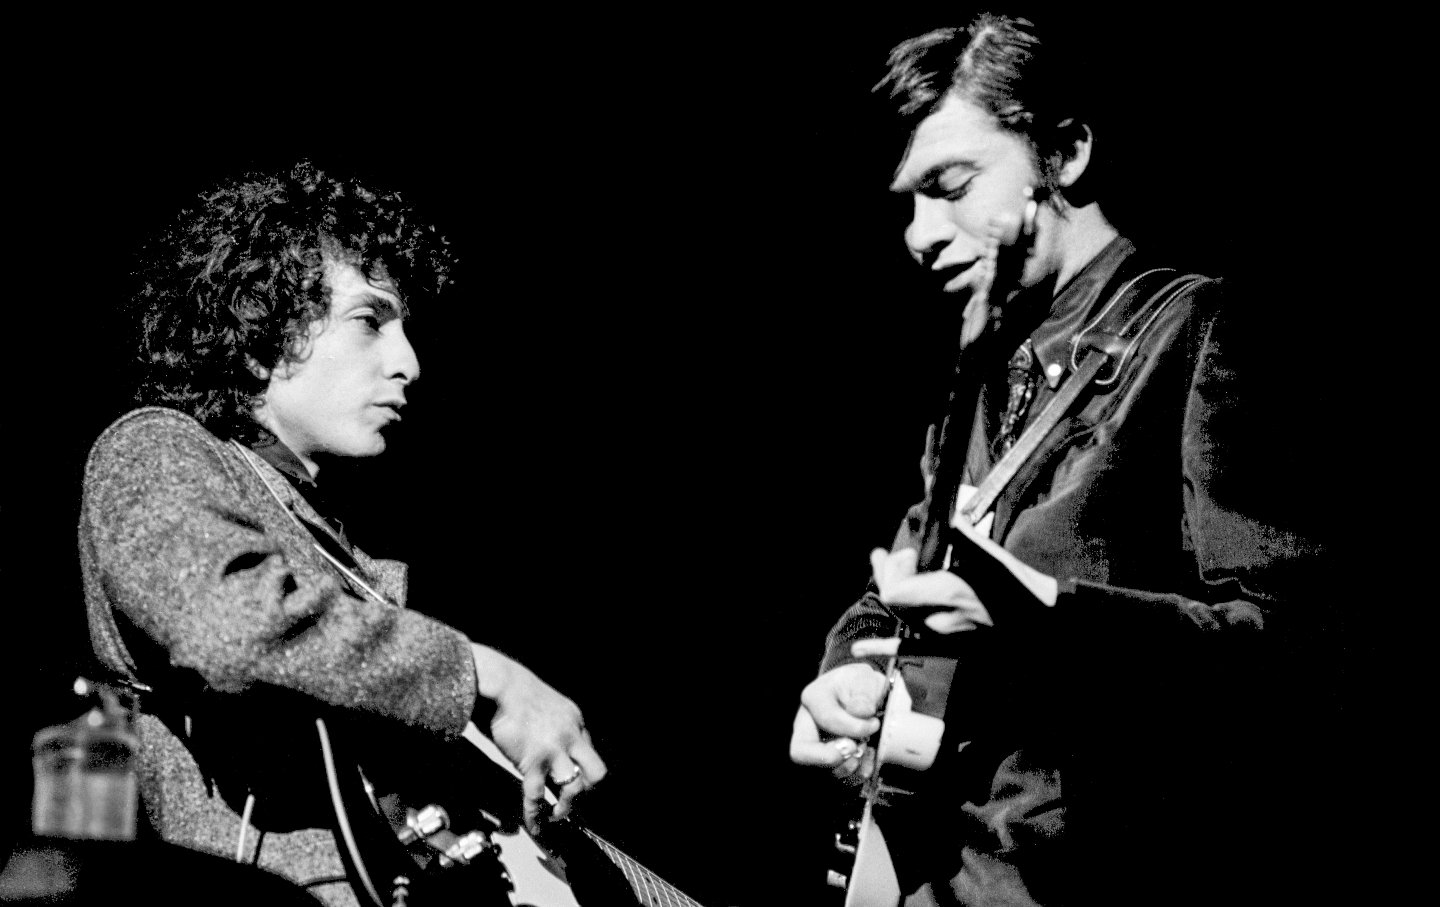 Bob Dylan and Robbie Robertson at the Academy of Music in 1966.